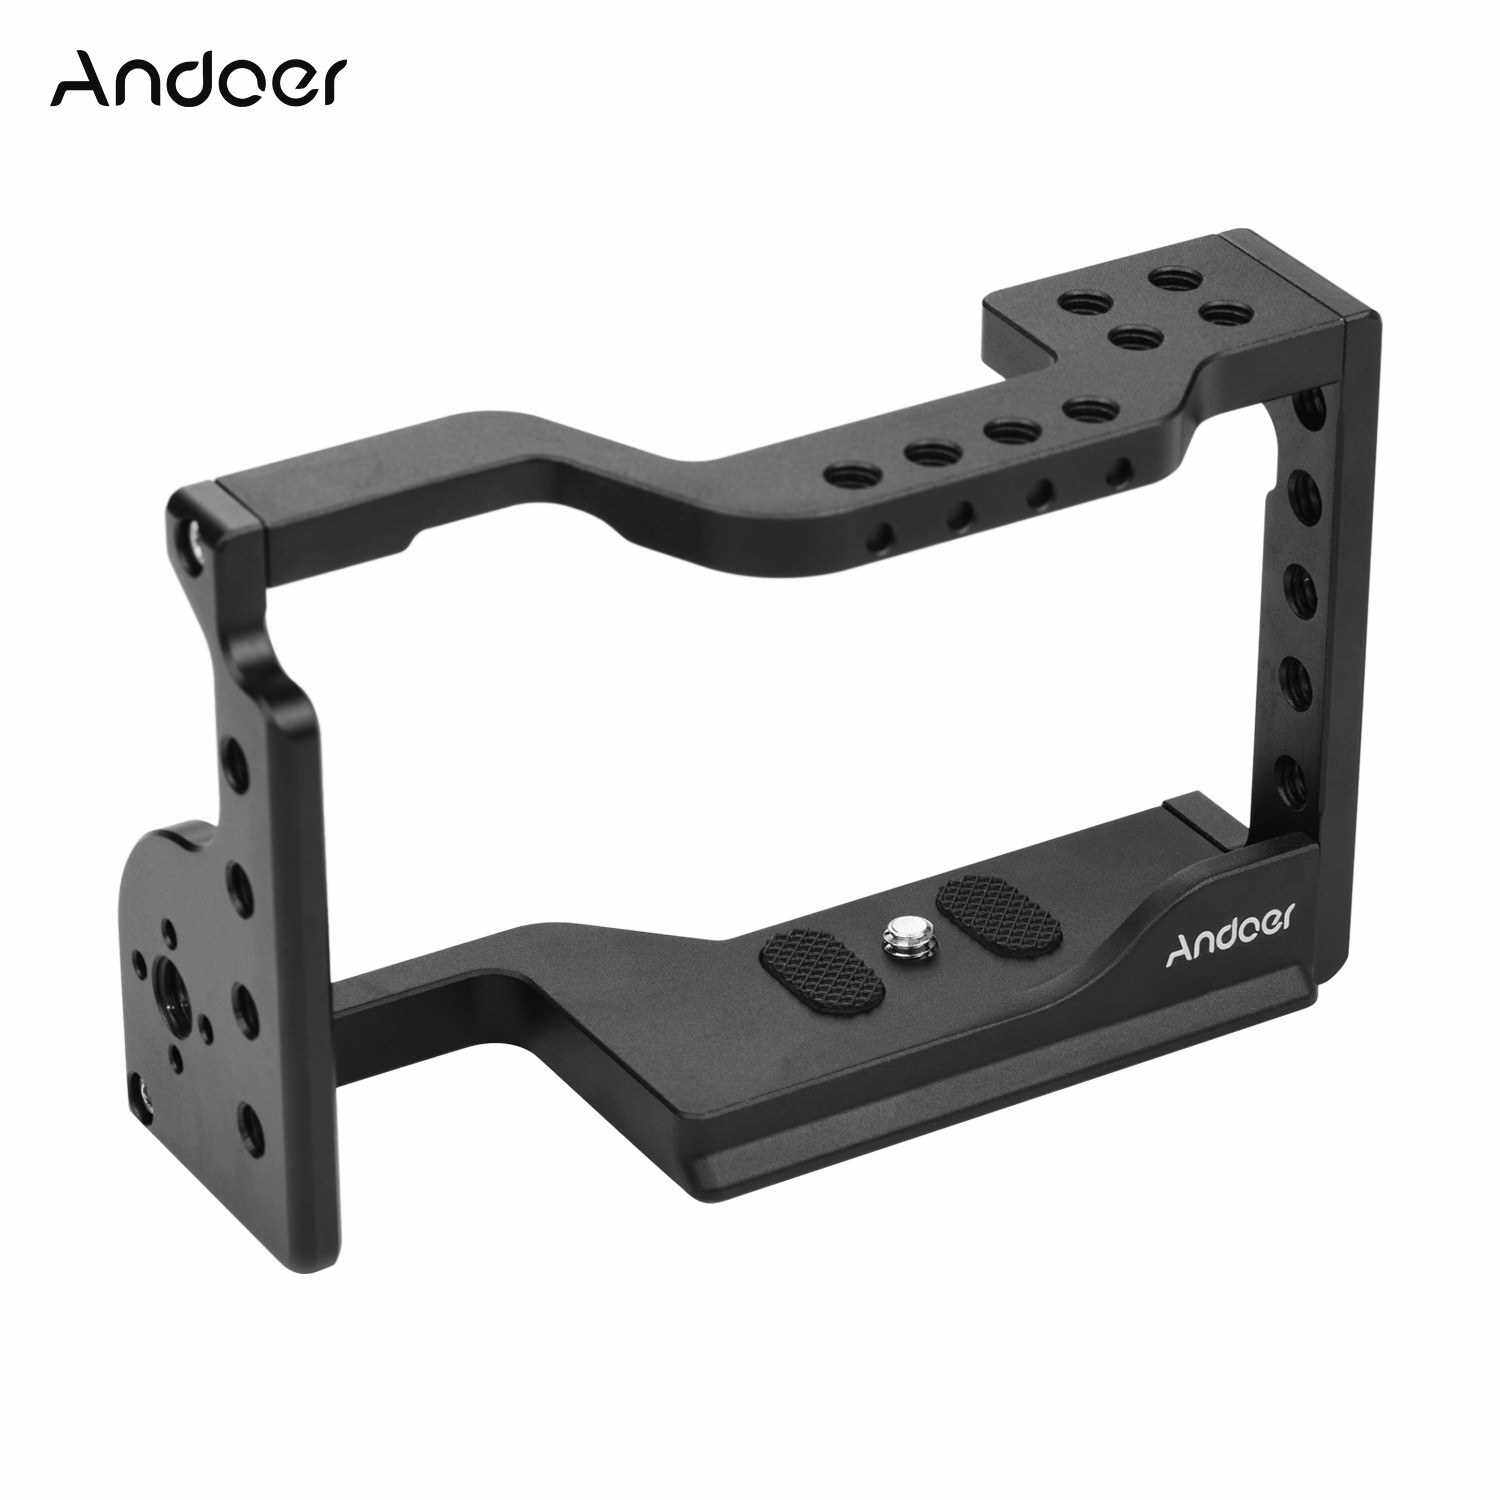 Andoer Professional Video Accessories Camera Cage Kit Aluminum Alloy Camera Case Bracket with Extension Thread Holes Cold Shoe Mount Filming Equipment Compatible with Sony A6600 ILDC Cameras (Standard)